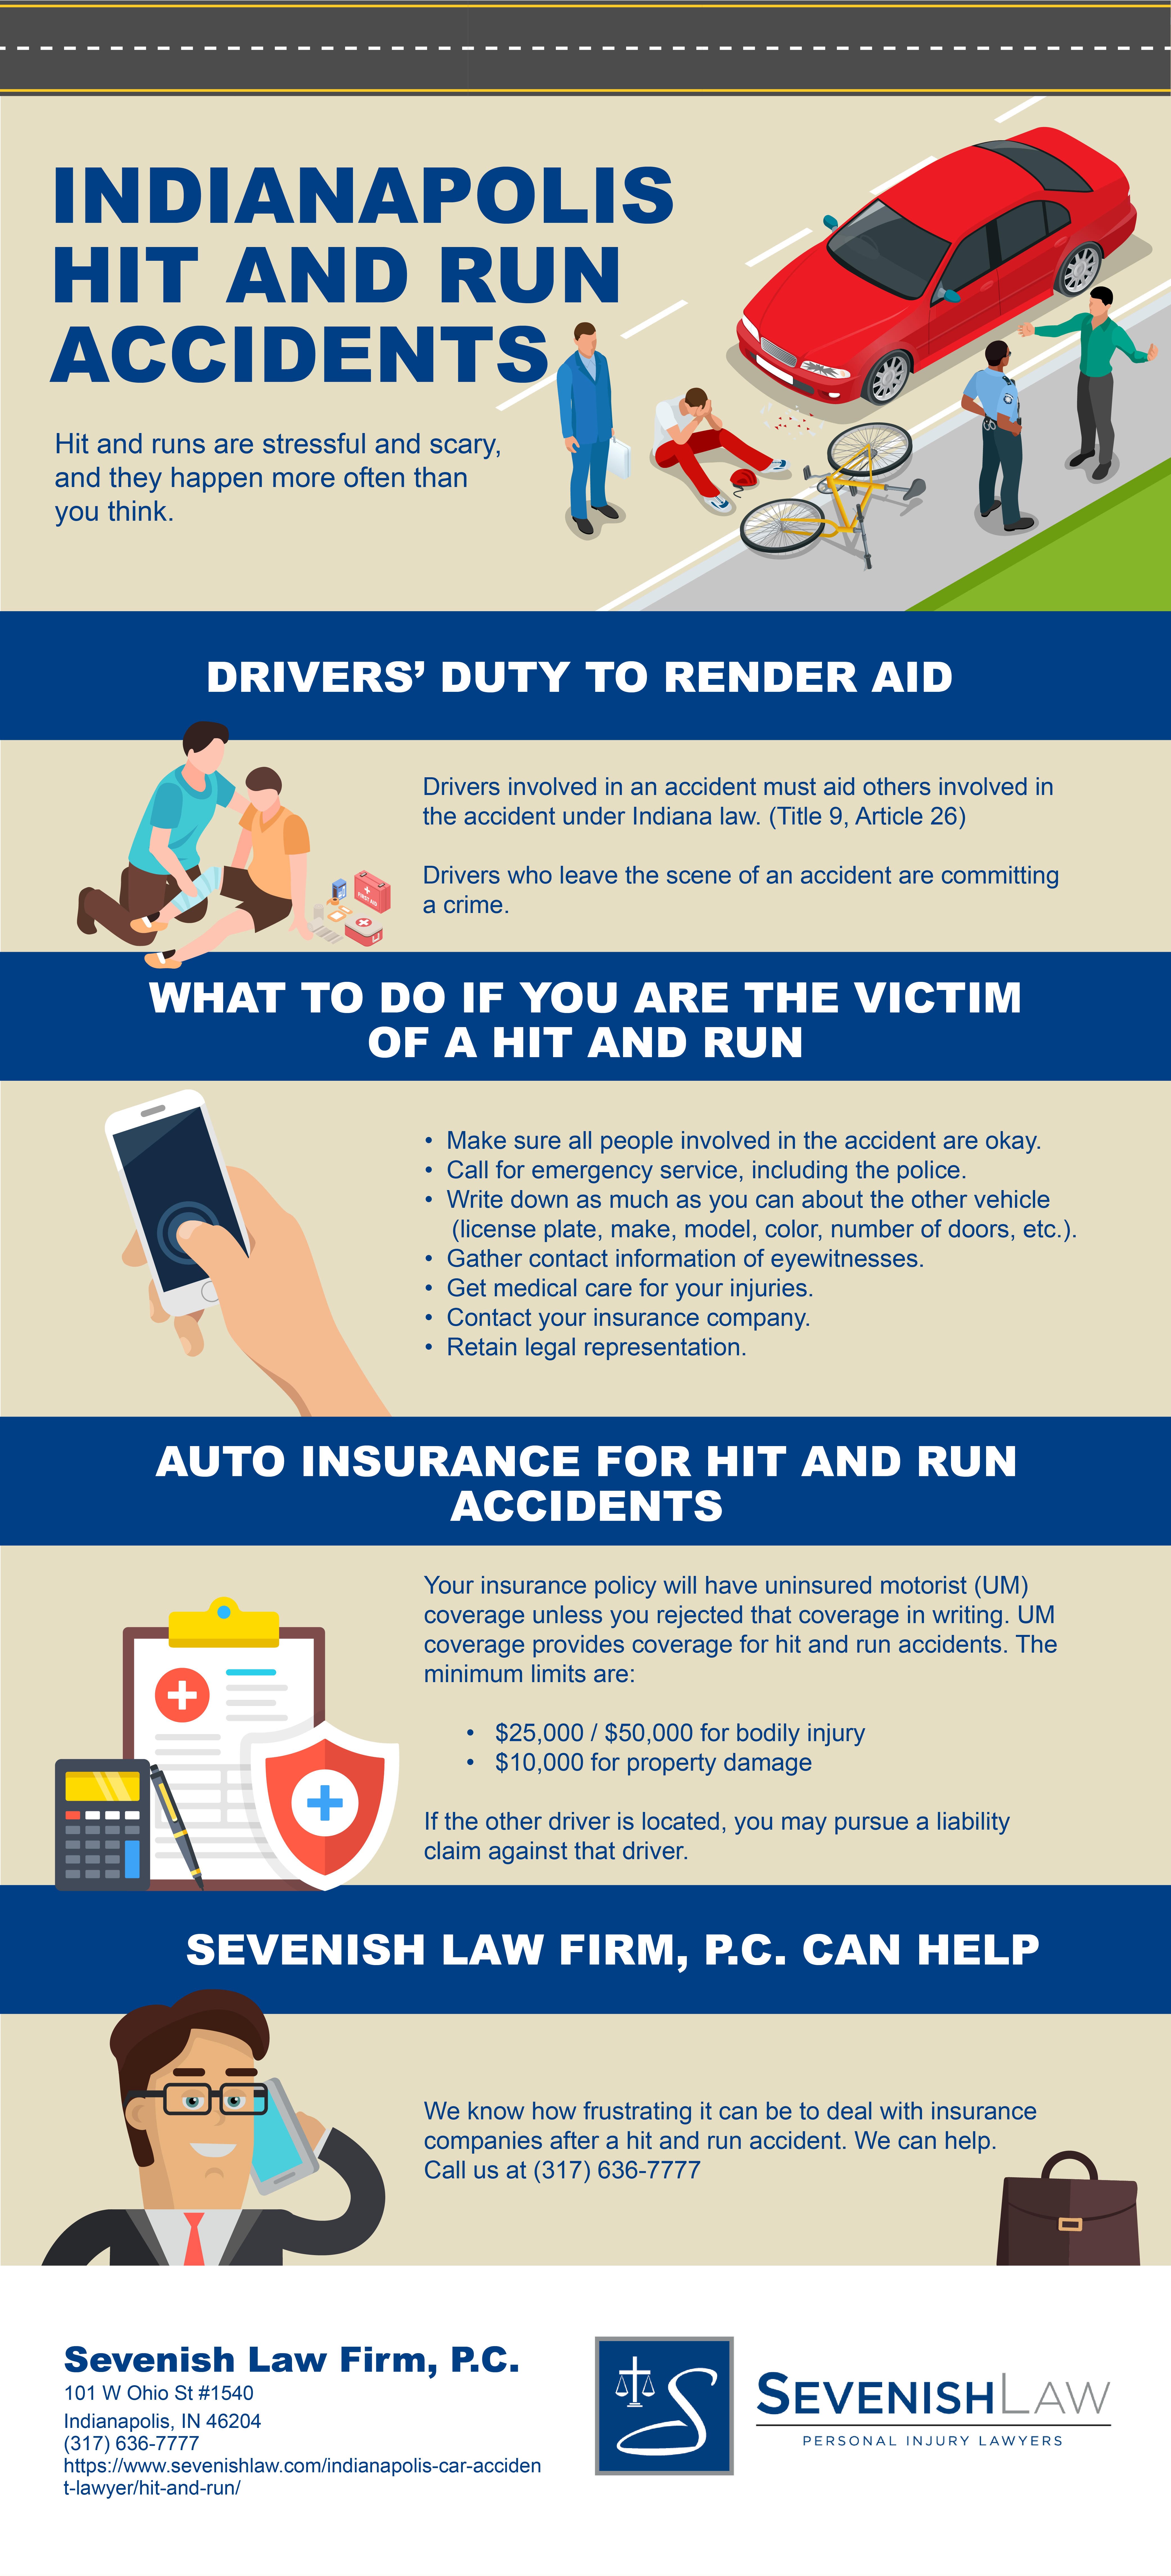 What to do after a hit and run accident